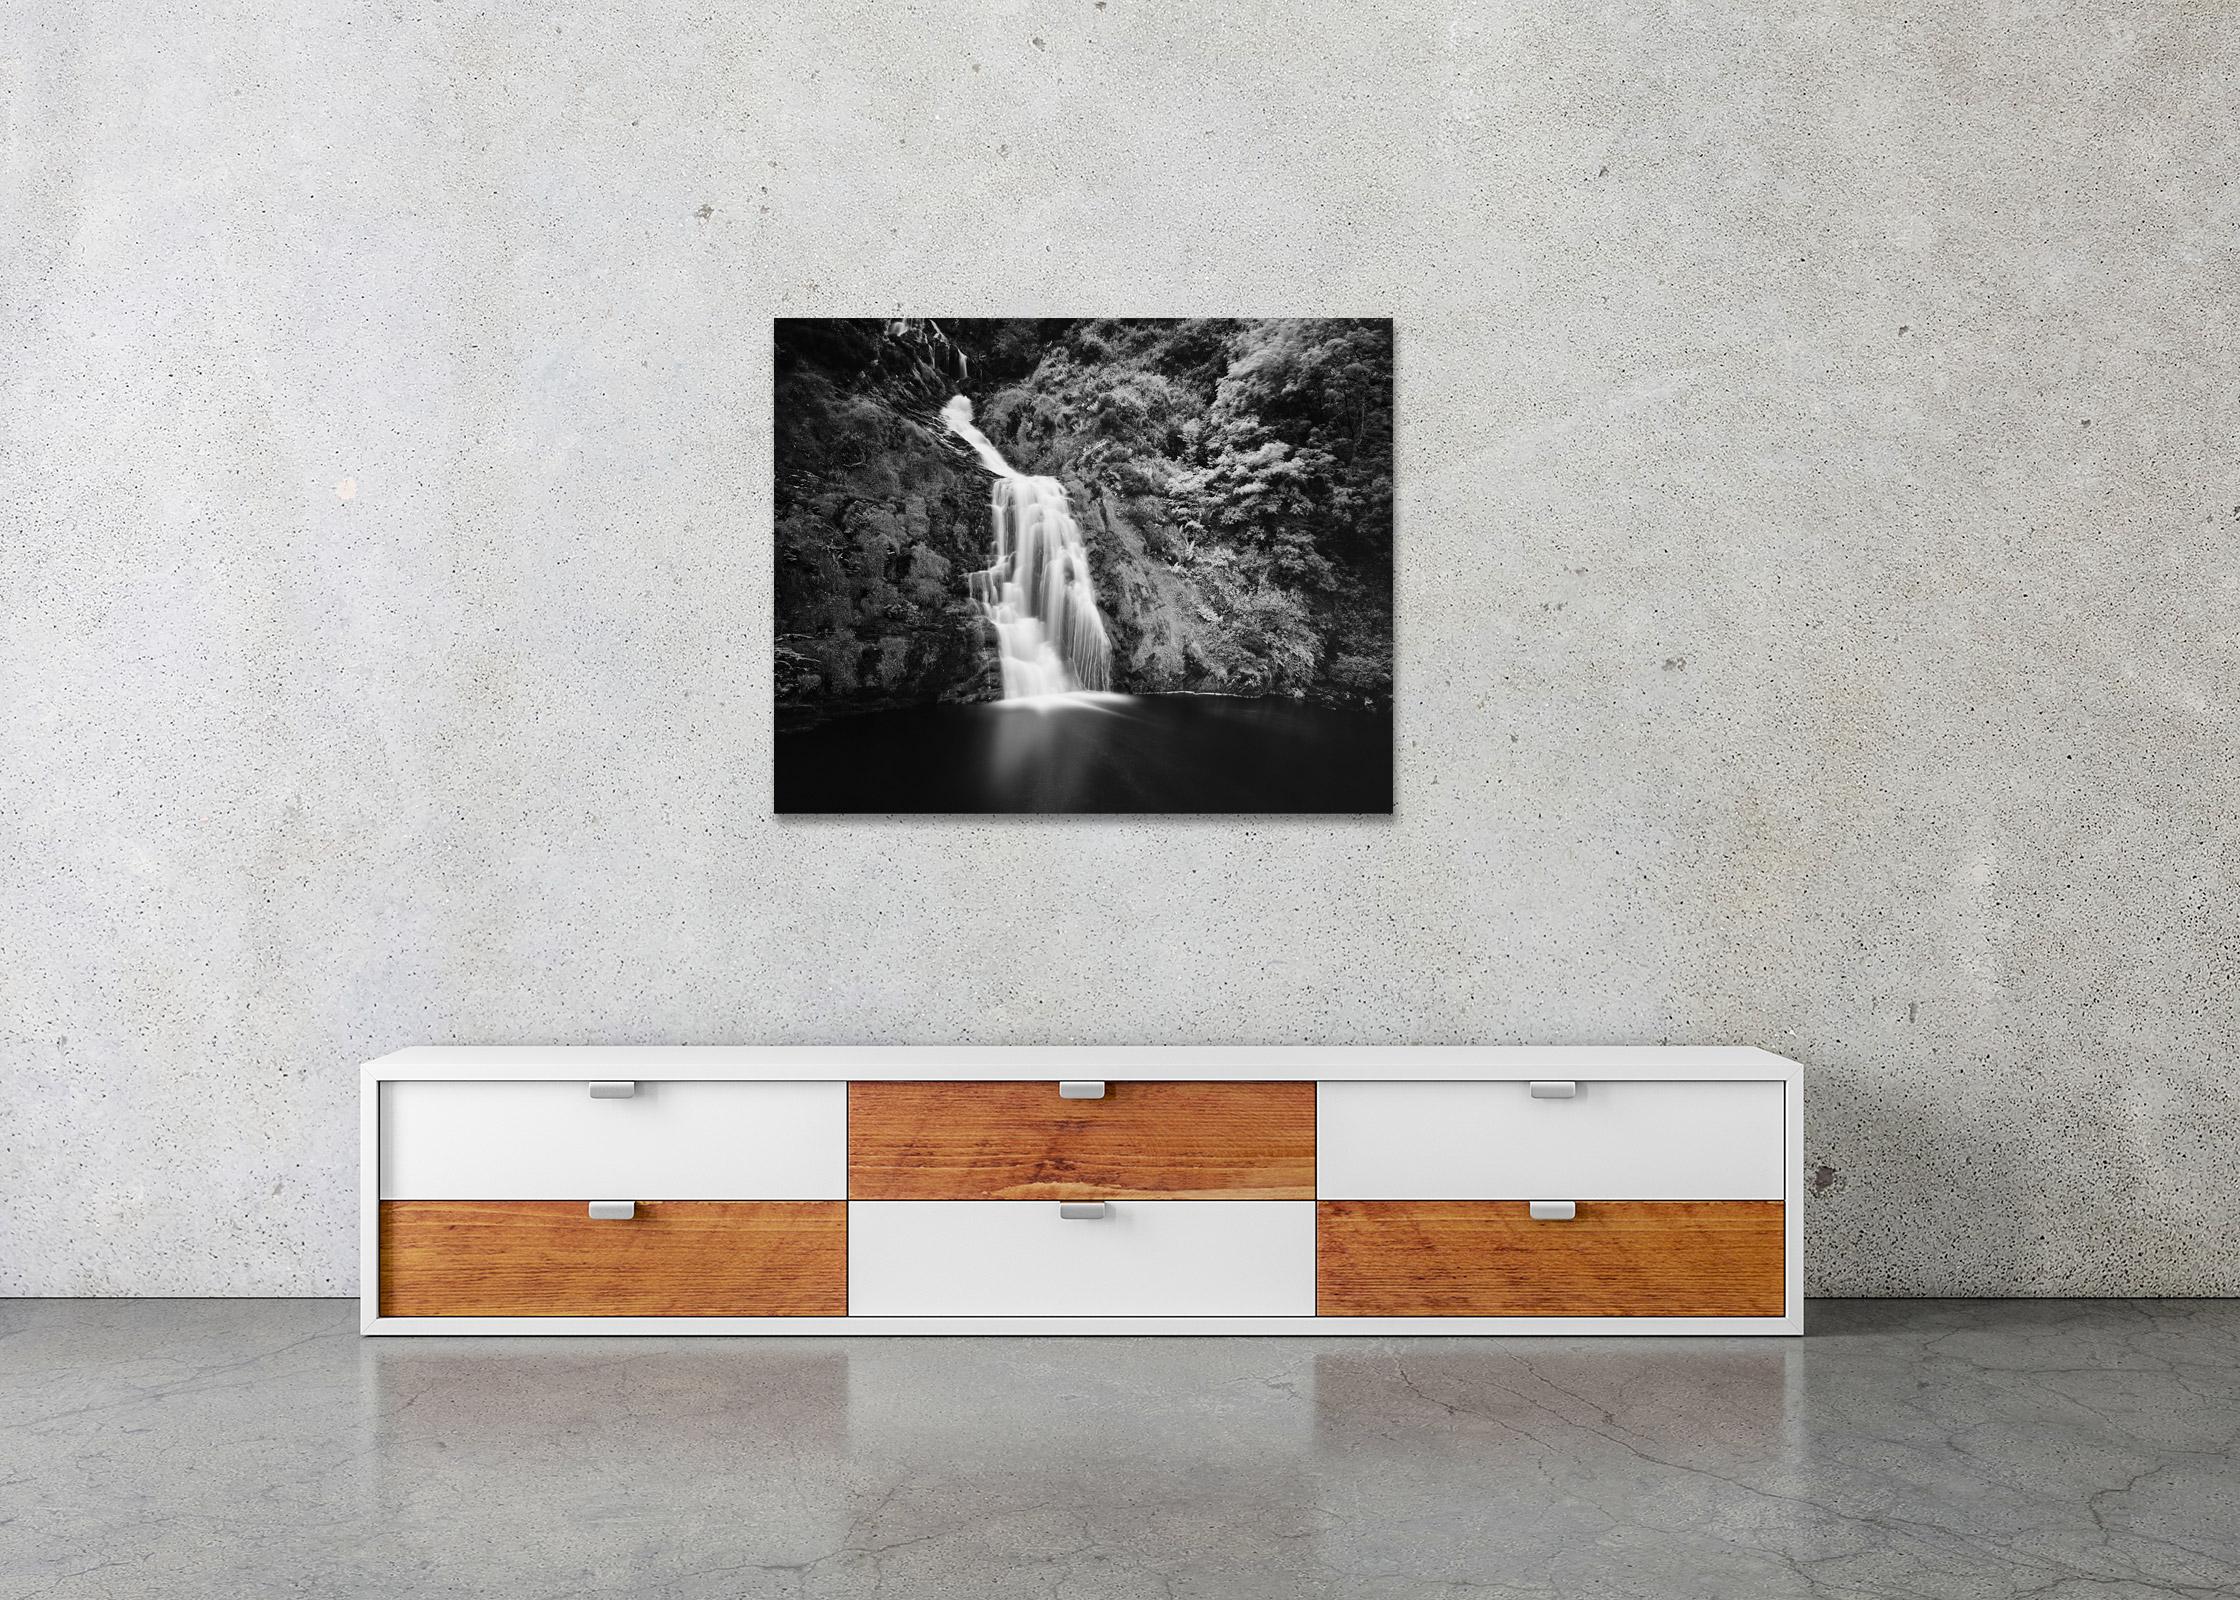 Black and white fine art long exposure landscape photography. Waterfall in the middle of the forest, Ireland. Archival pigment ink print, edition of 7. Signed, titled, dated and numbered by artist. Certificate of authenticity included. Printed with